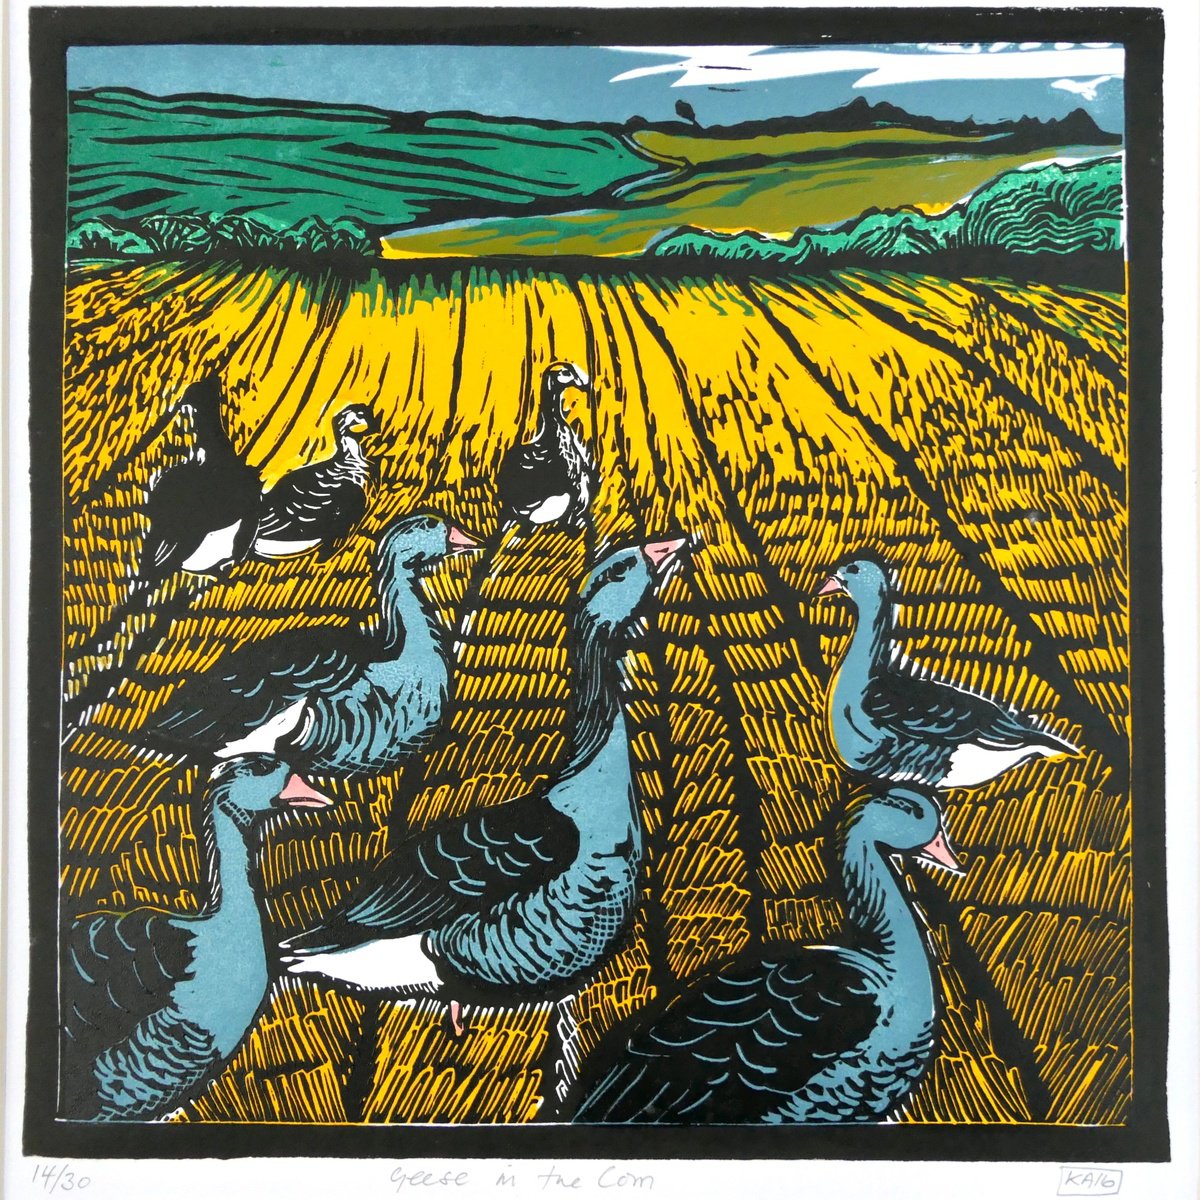 Geese in the Corn by Keith Alexander